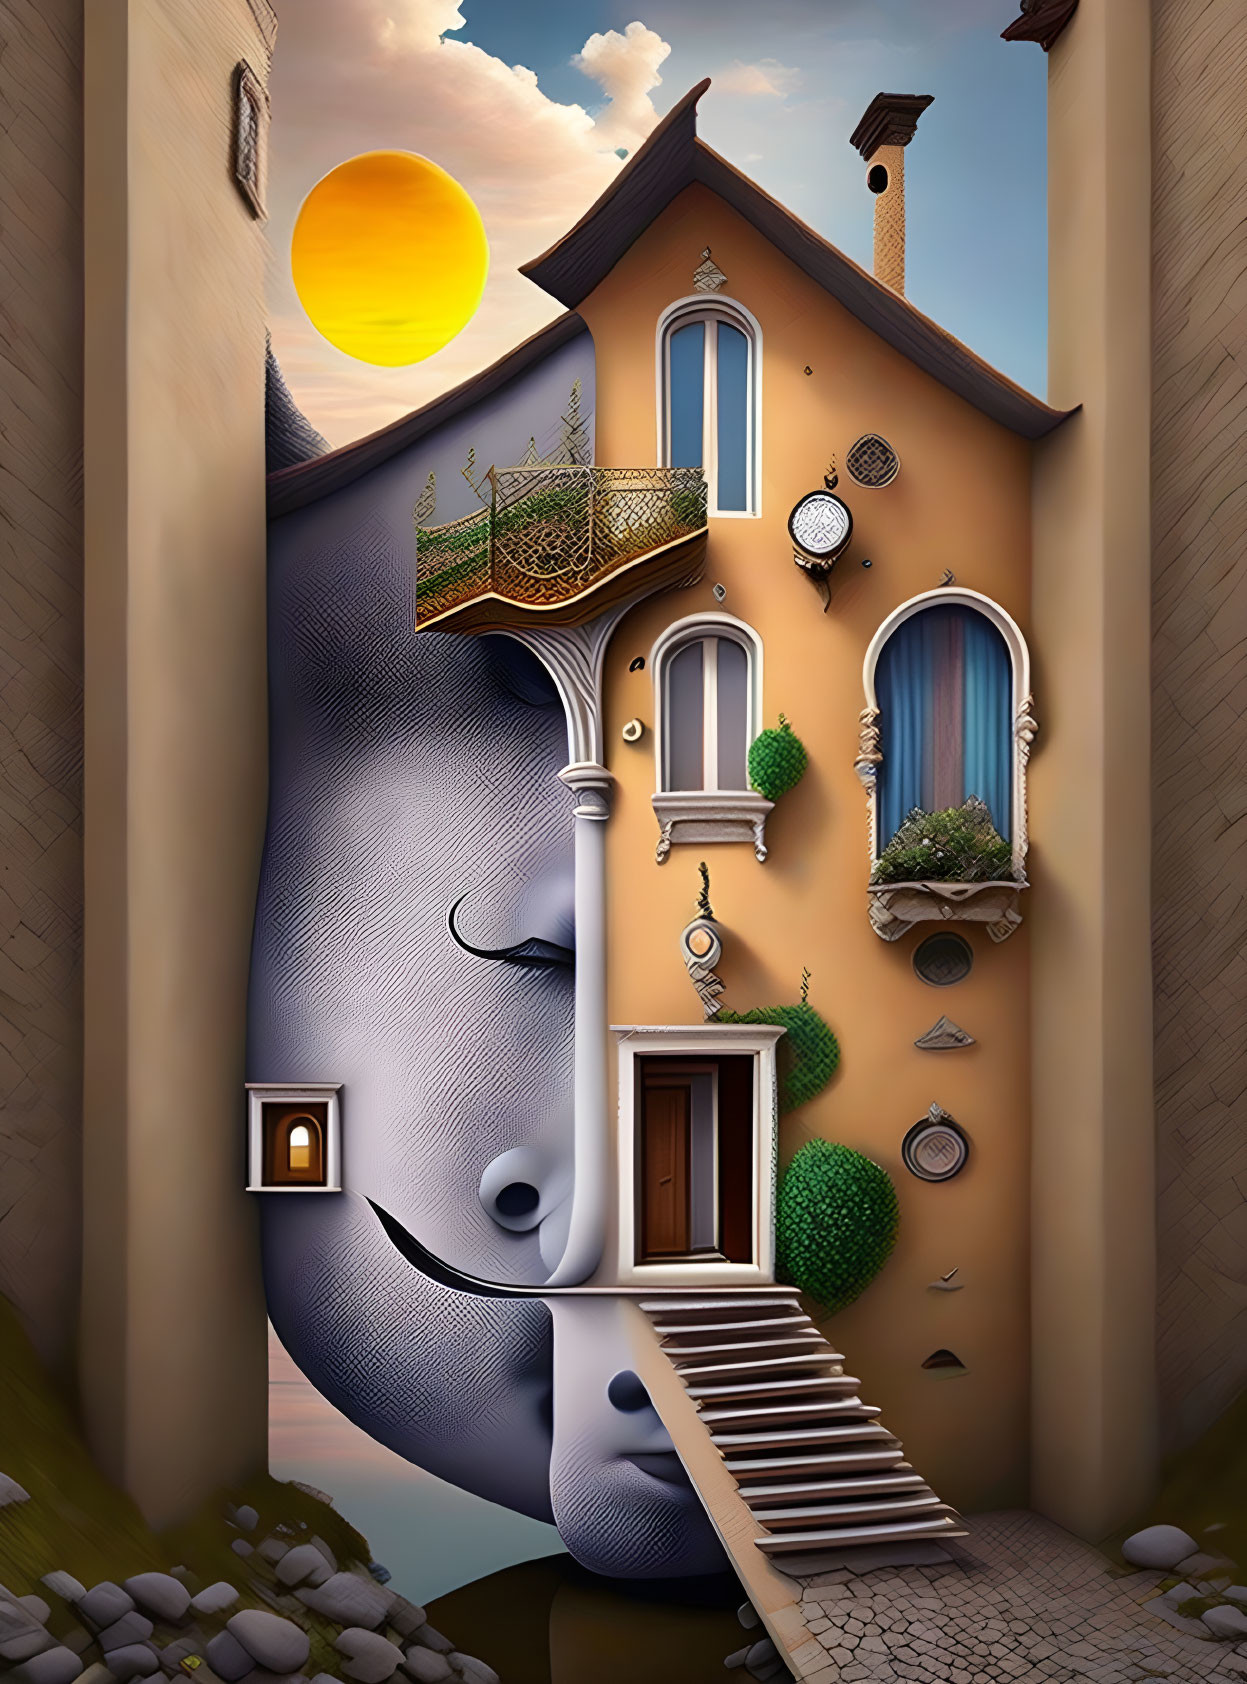 Surreal house with human-like features against evening sky